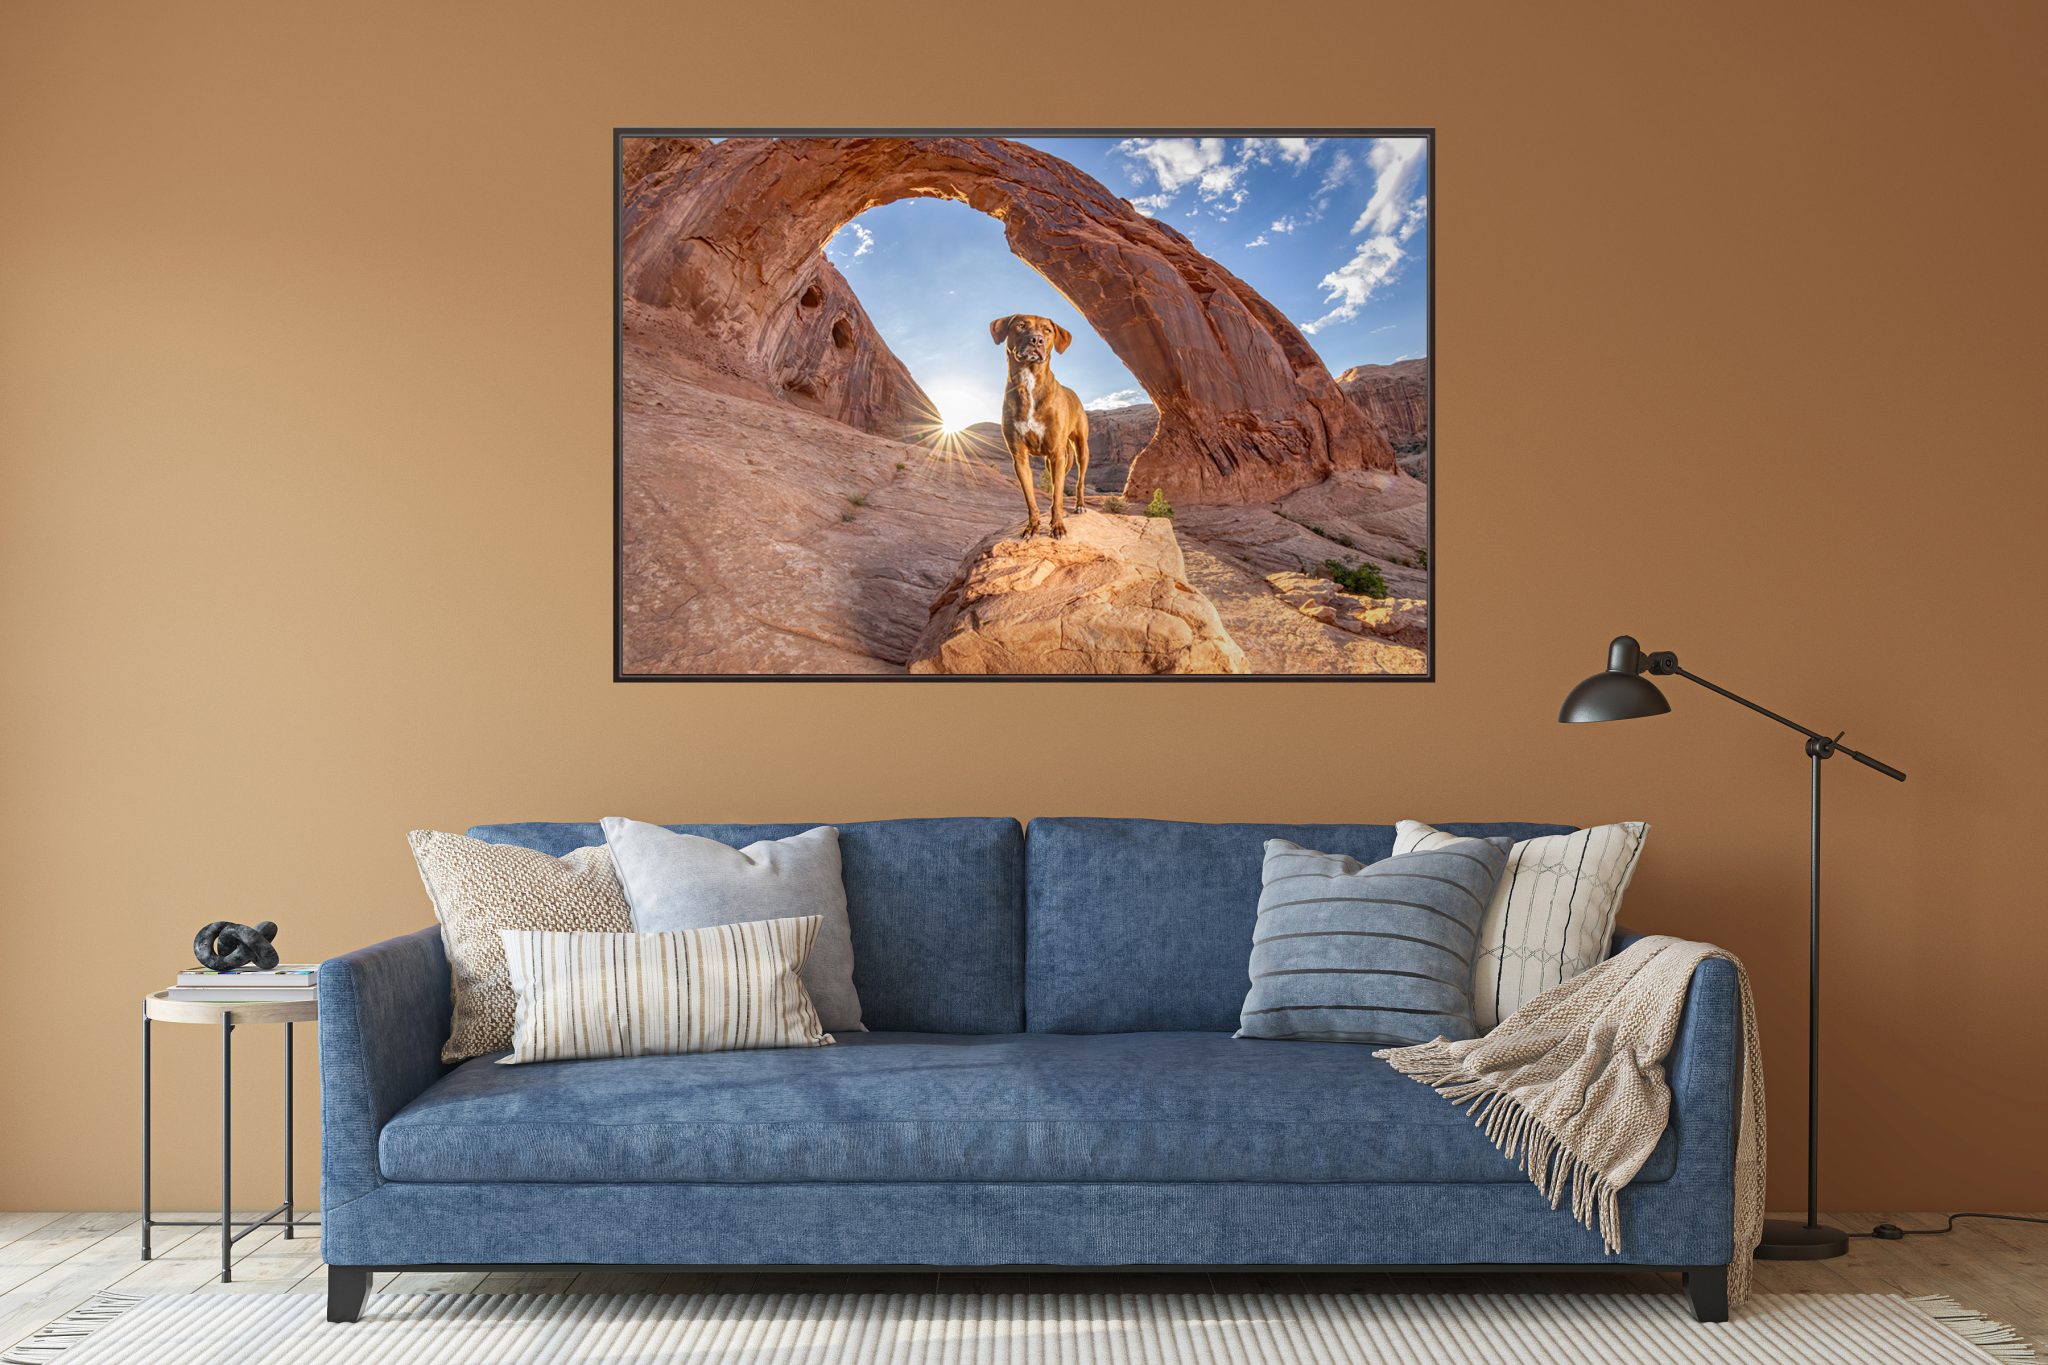 Pet Portrait of Dog Guinness framed by Corona Arch near Moab, Utah in a brown living room. This is a statement piece over a blue sofa